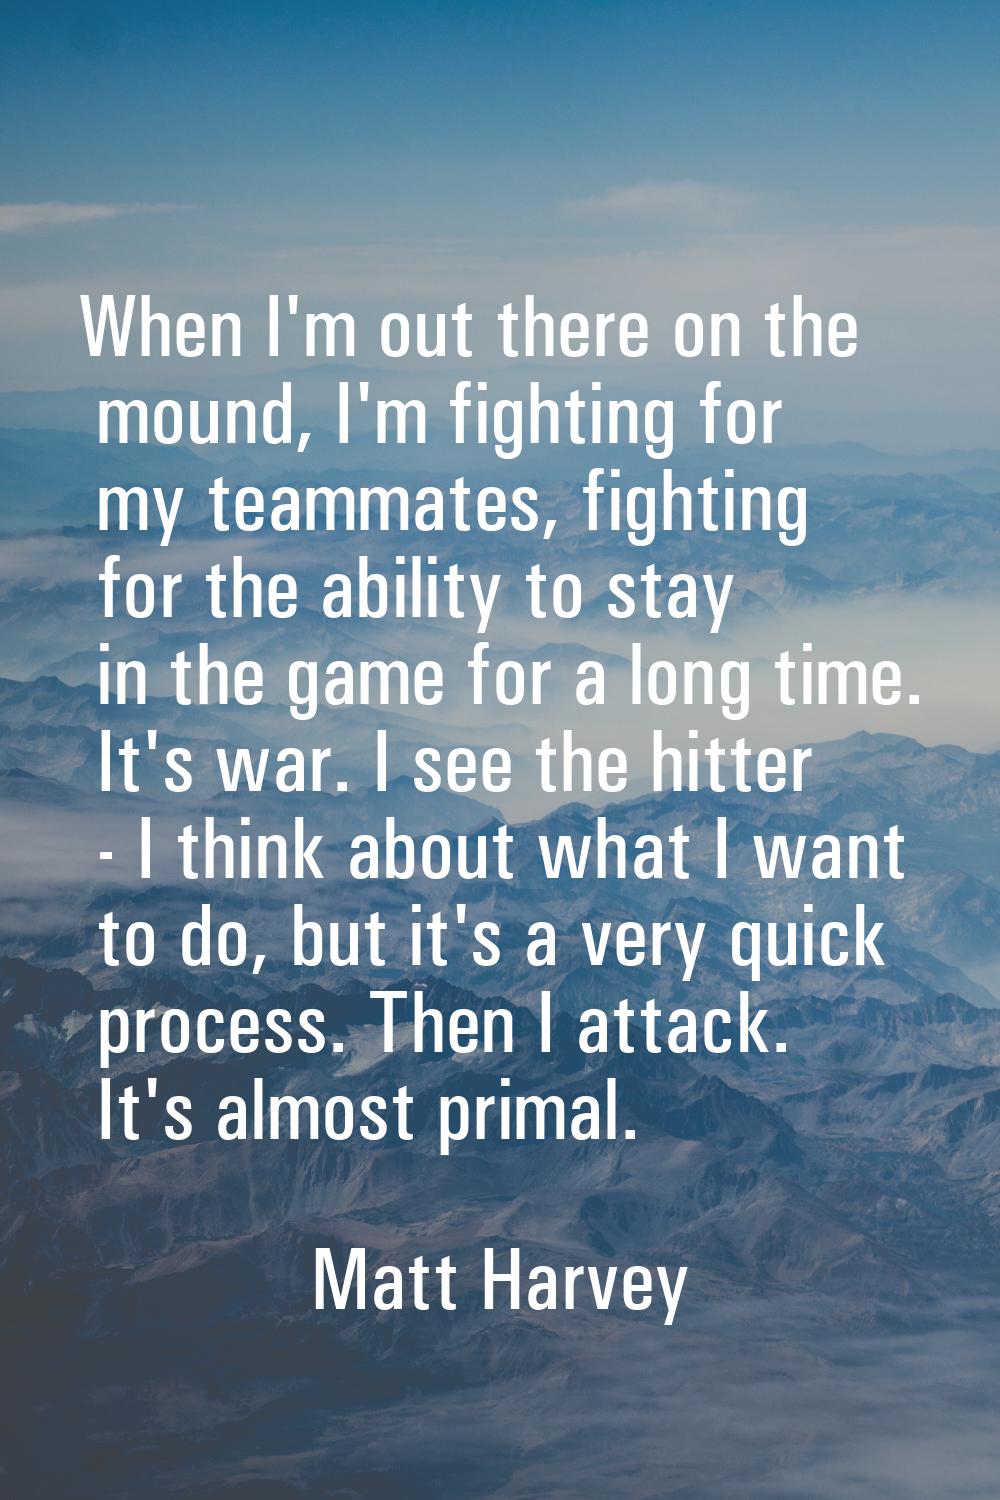 When I'm out there on the mound, I'm fighting for my teammates, fighting for the ability to stay in